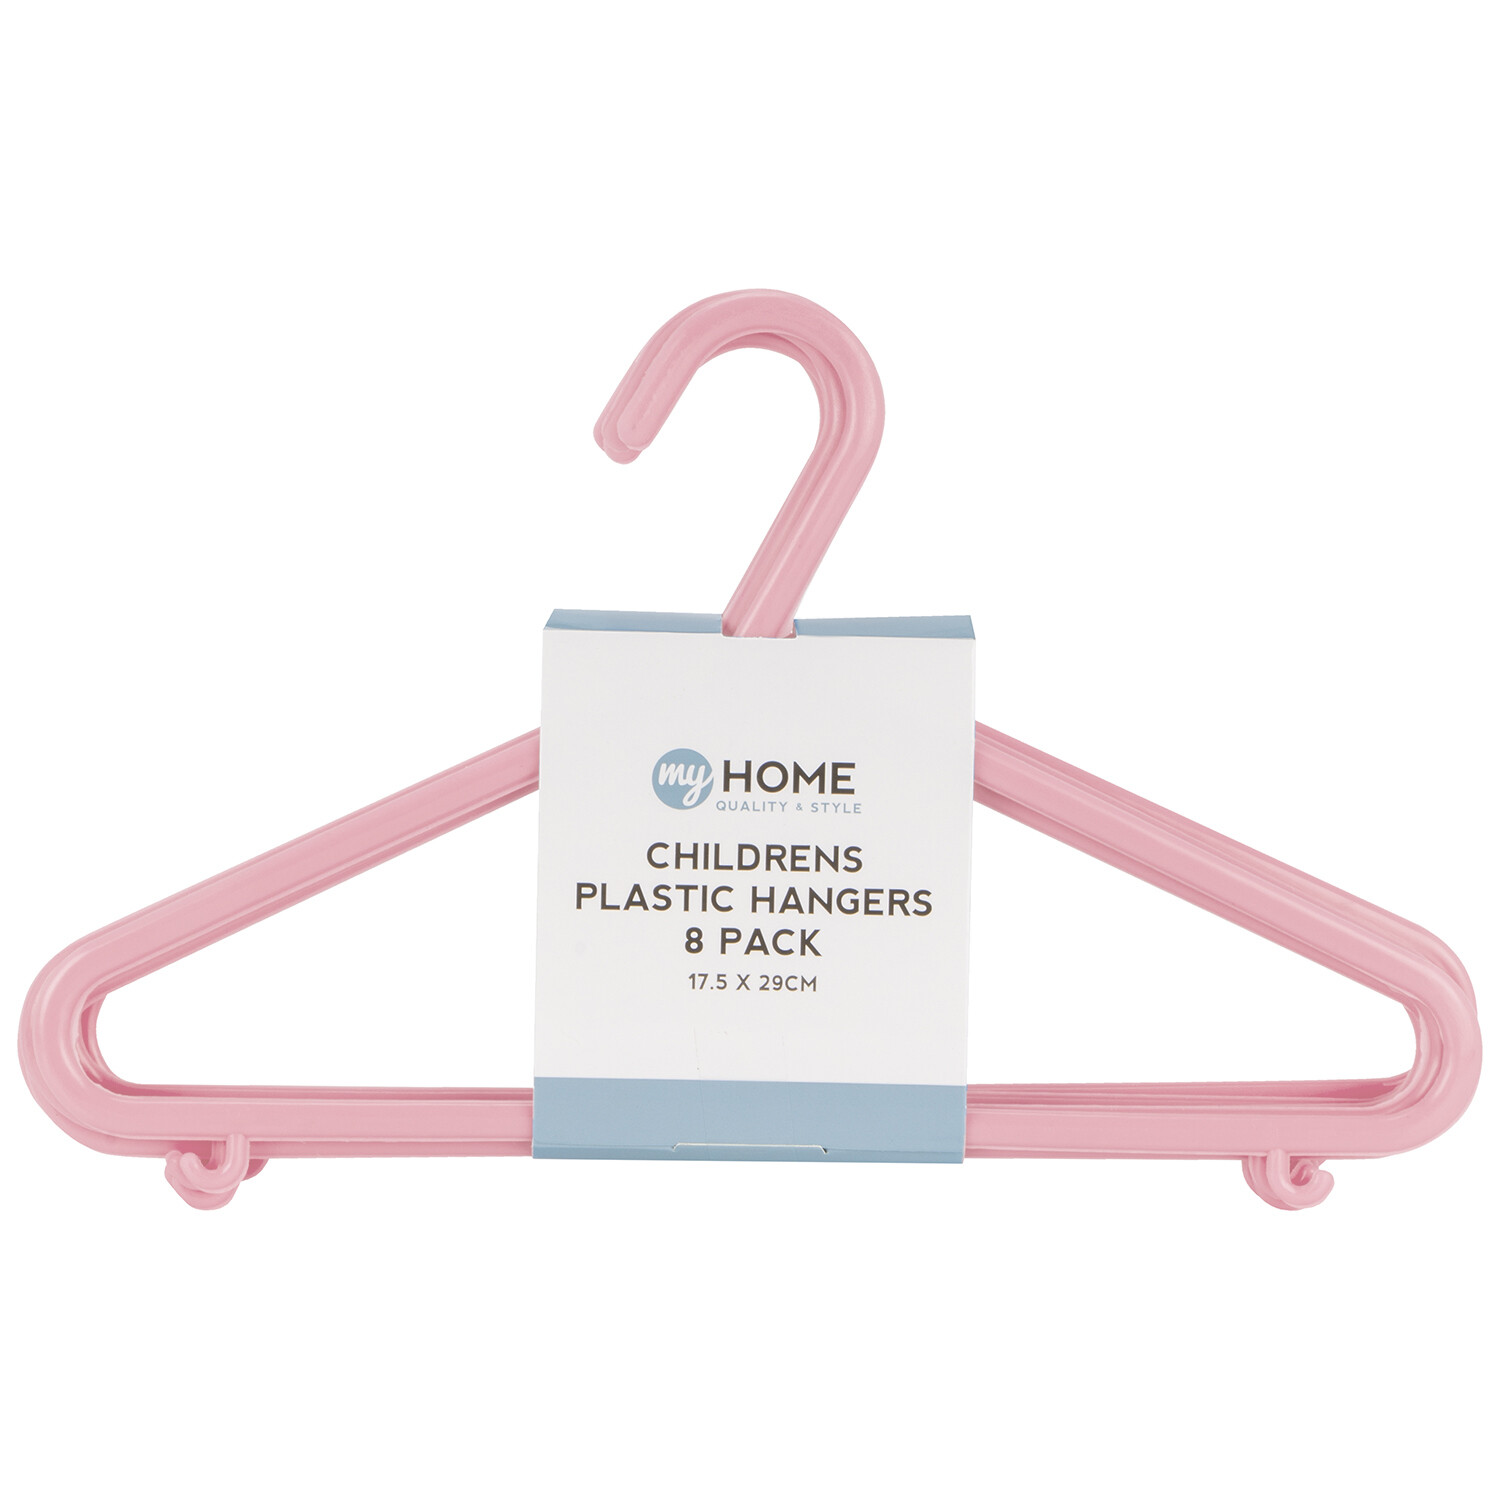 My Home Children's Plastic Clothes Hanger 8 Pack Image 3